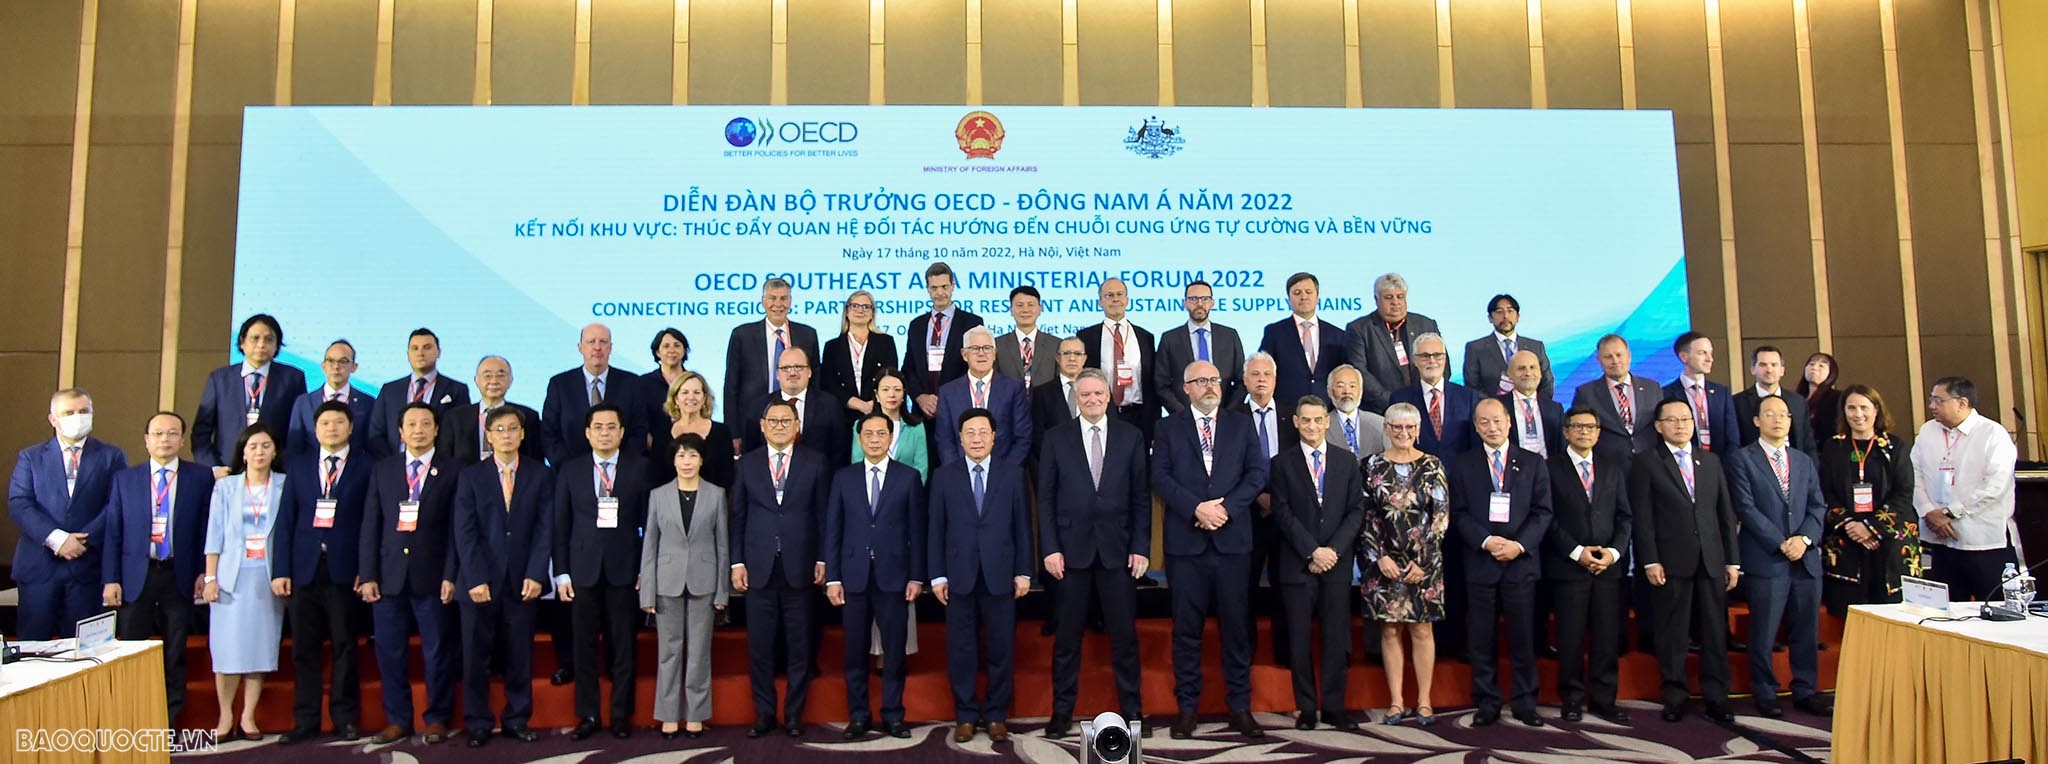 OECD Southeast Asia Ministerial Forum 2022 opens in Hanoi